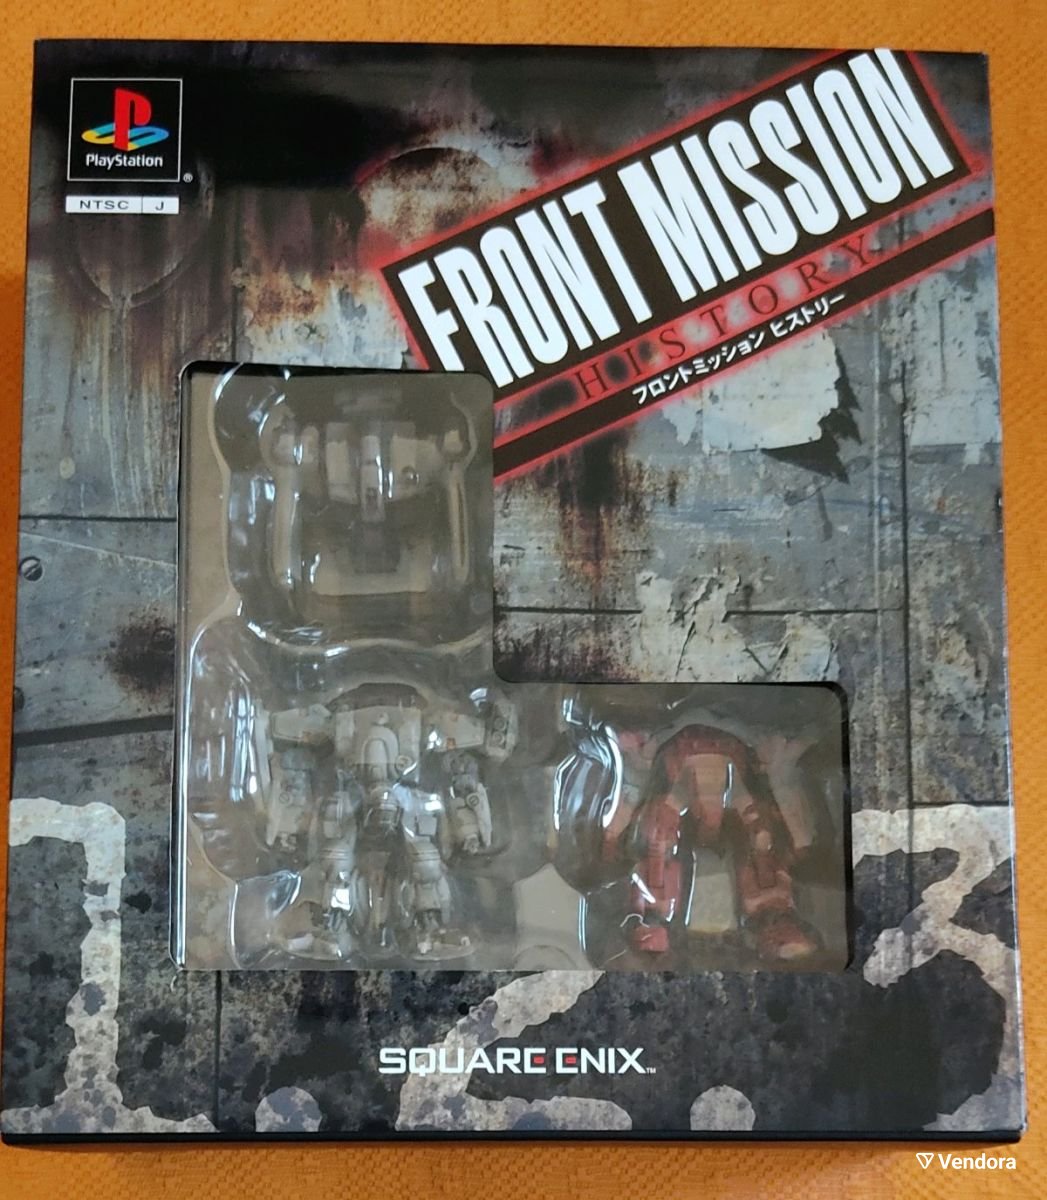 FRONT MISSION History - 旧機種